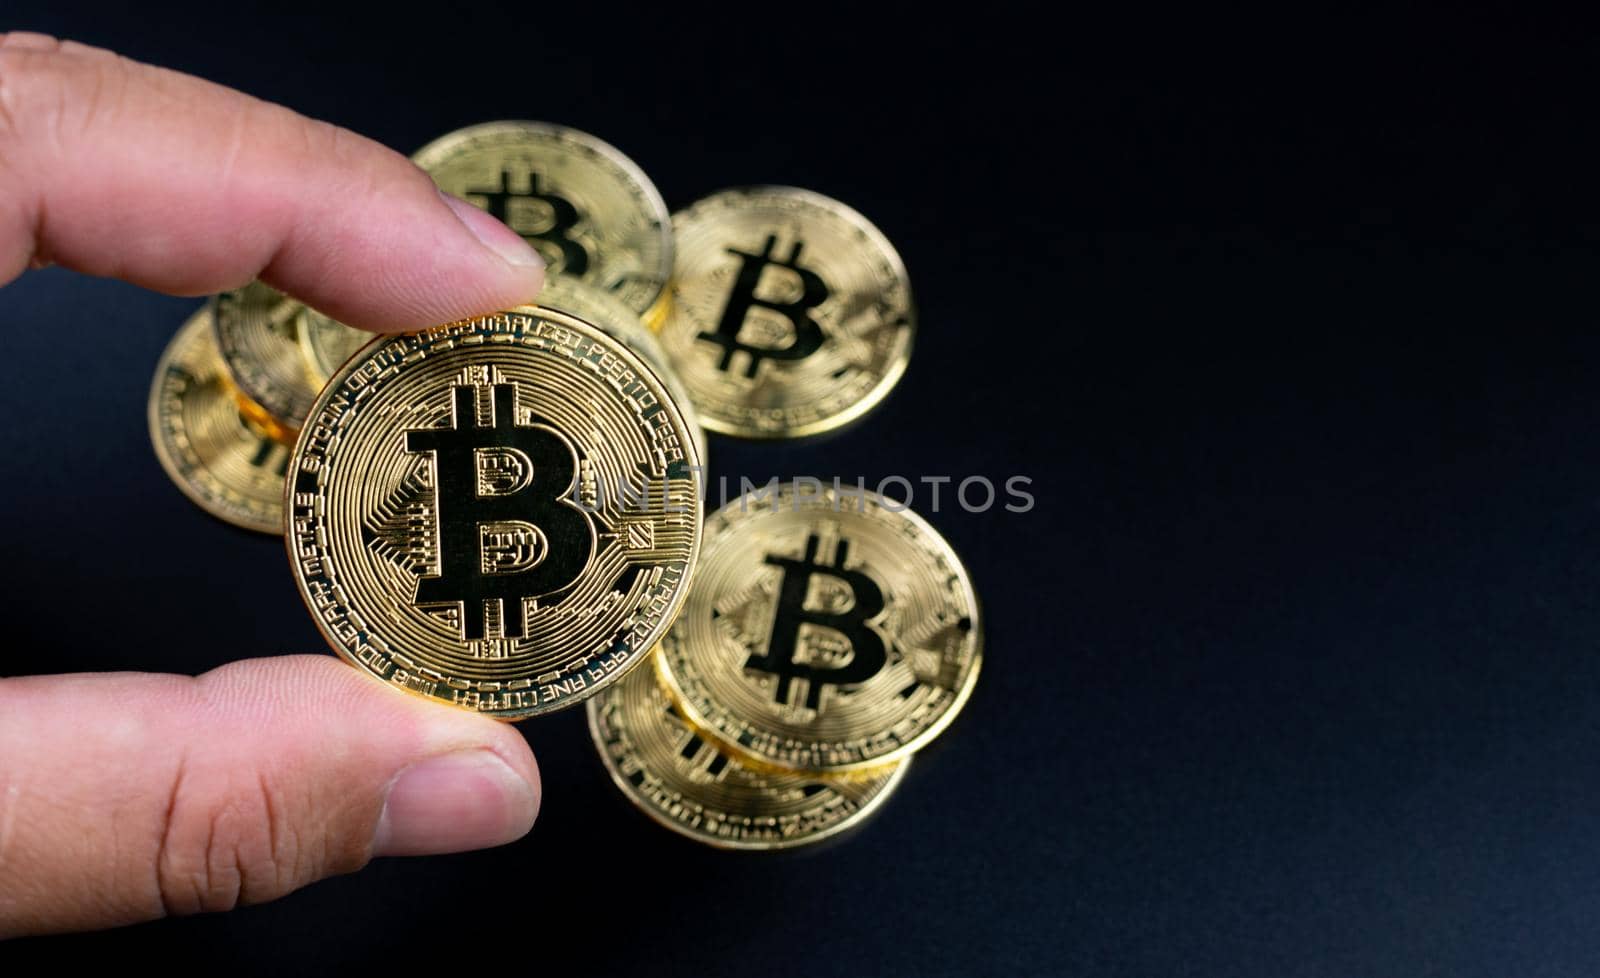 Human fingers holding bitcoins on a black background